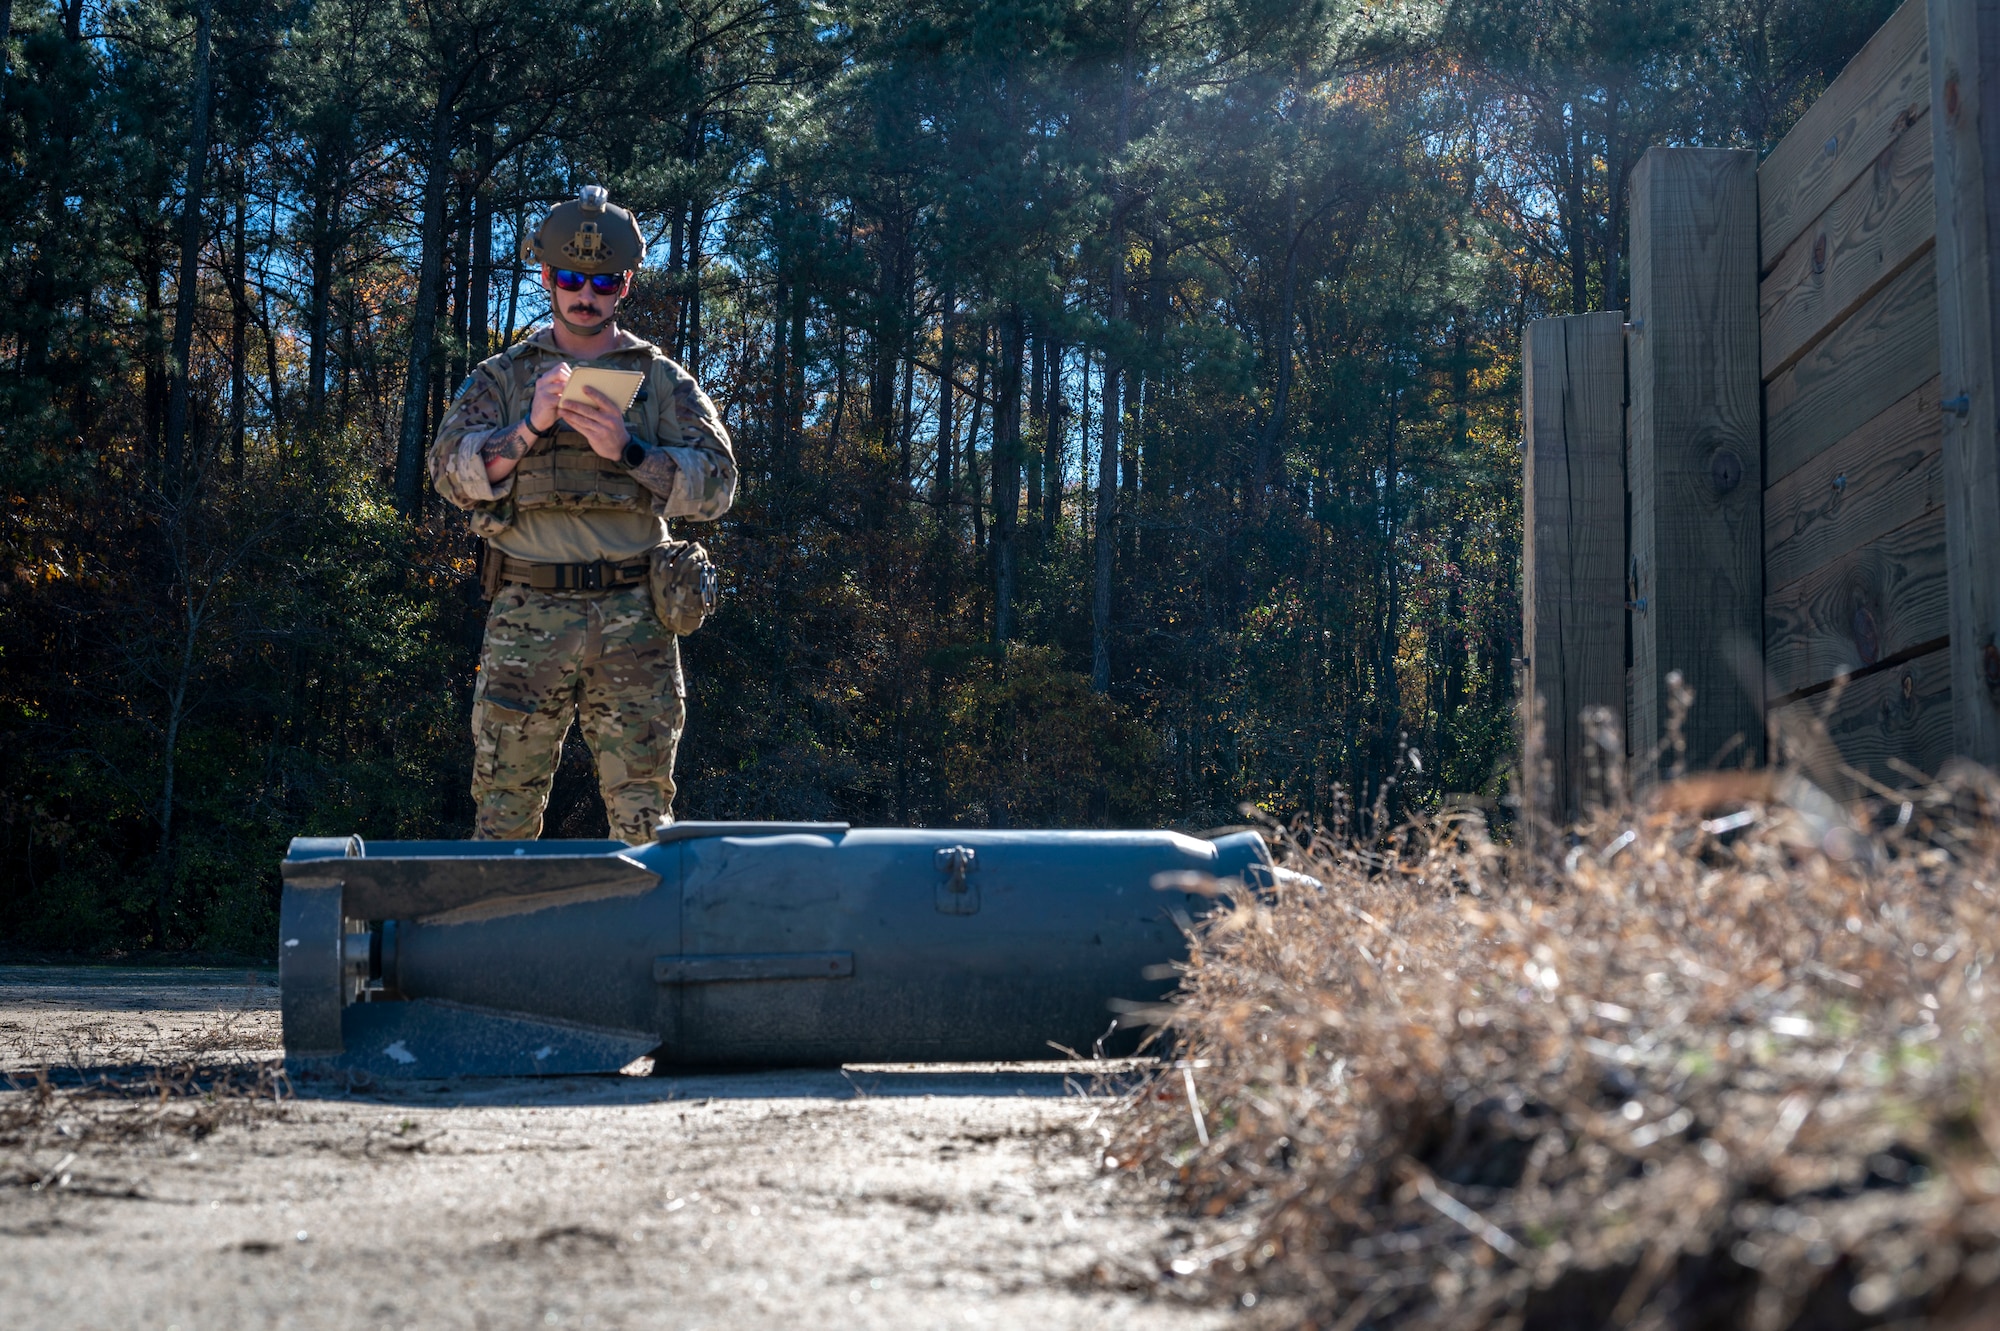 Staff Sgt. Adam King, 4th Civil Engineer Squadron explosive ordnance disposal team leaders, inspects inert explosives during EOD training, at Seymour Johnson Air Force Base, North Carolina, Dec. 1, 2022. EOD teams are dispatched to neutralize highly dangerous materials after a safe perimeter has been established around the device. (U.S. Air Force photo by Airman 1st Class Sabrina Fuller)